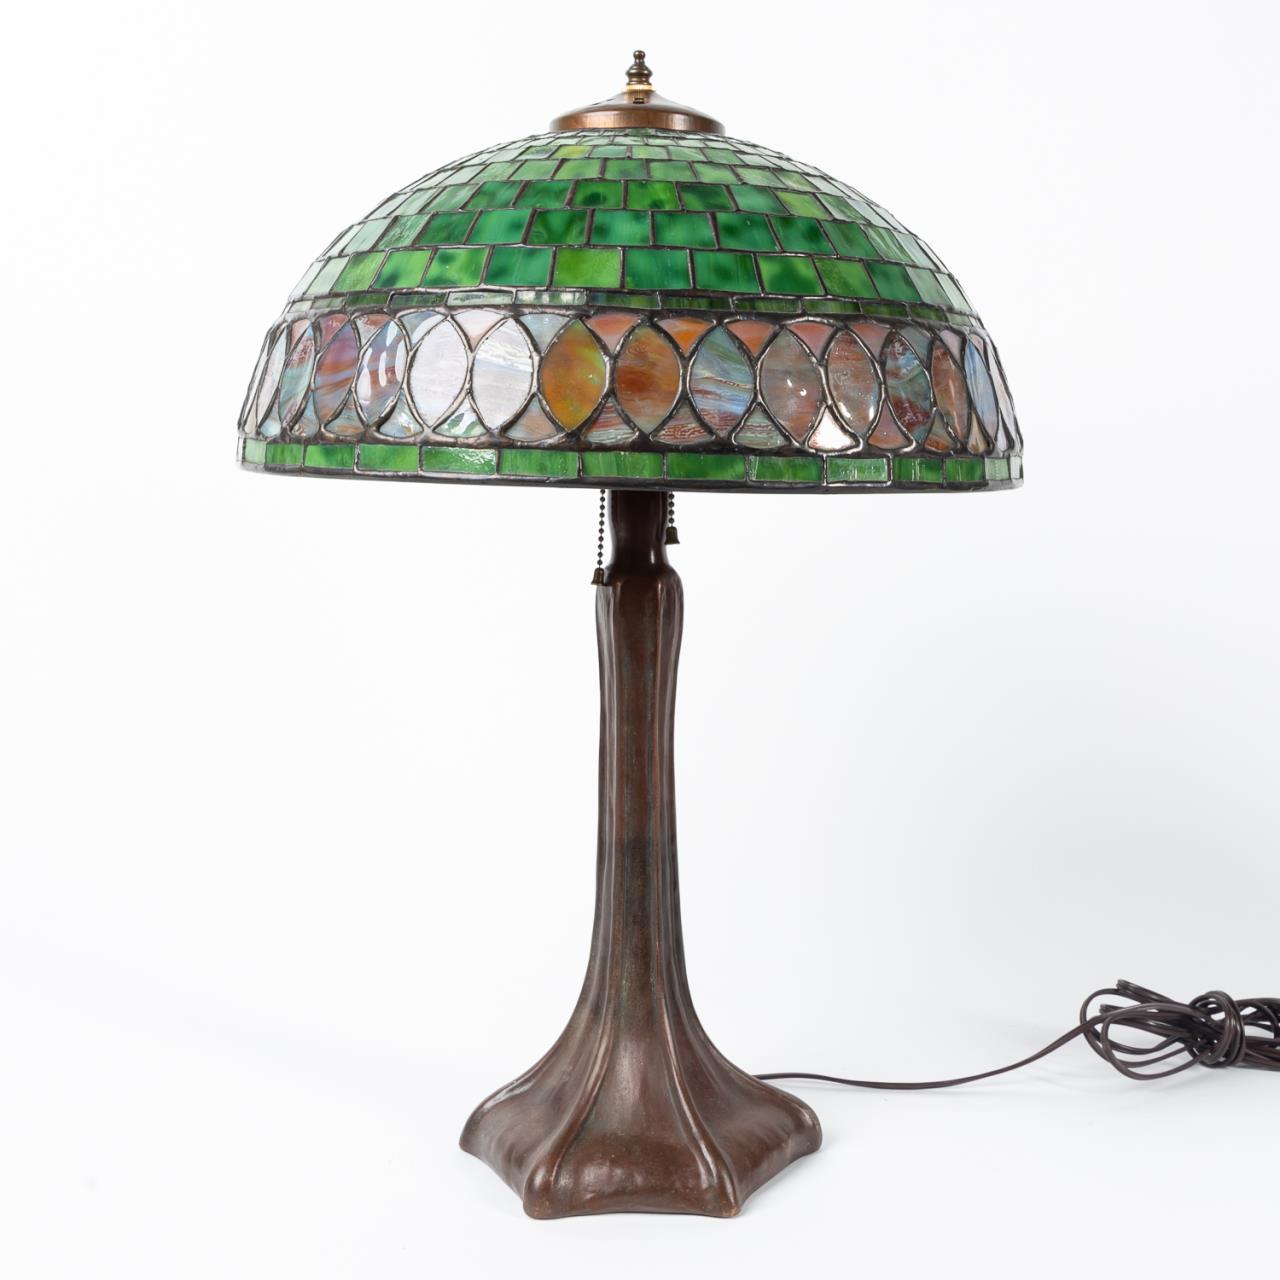 GEOMETRIC STAINED GLASS LAMP ON 35a561